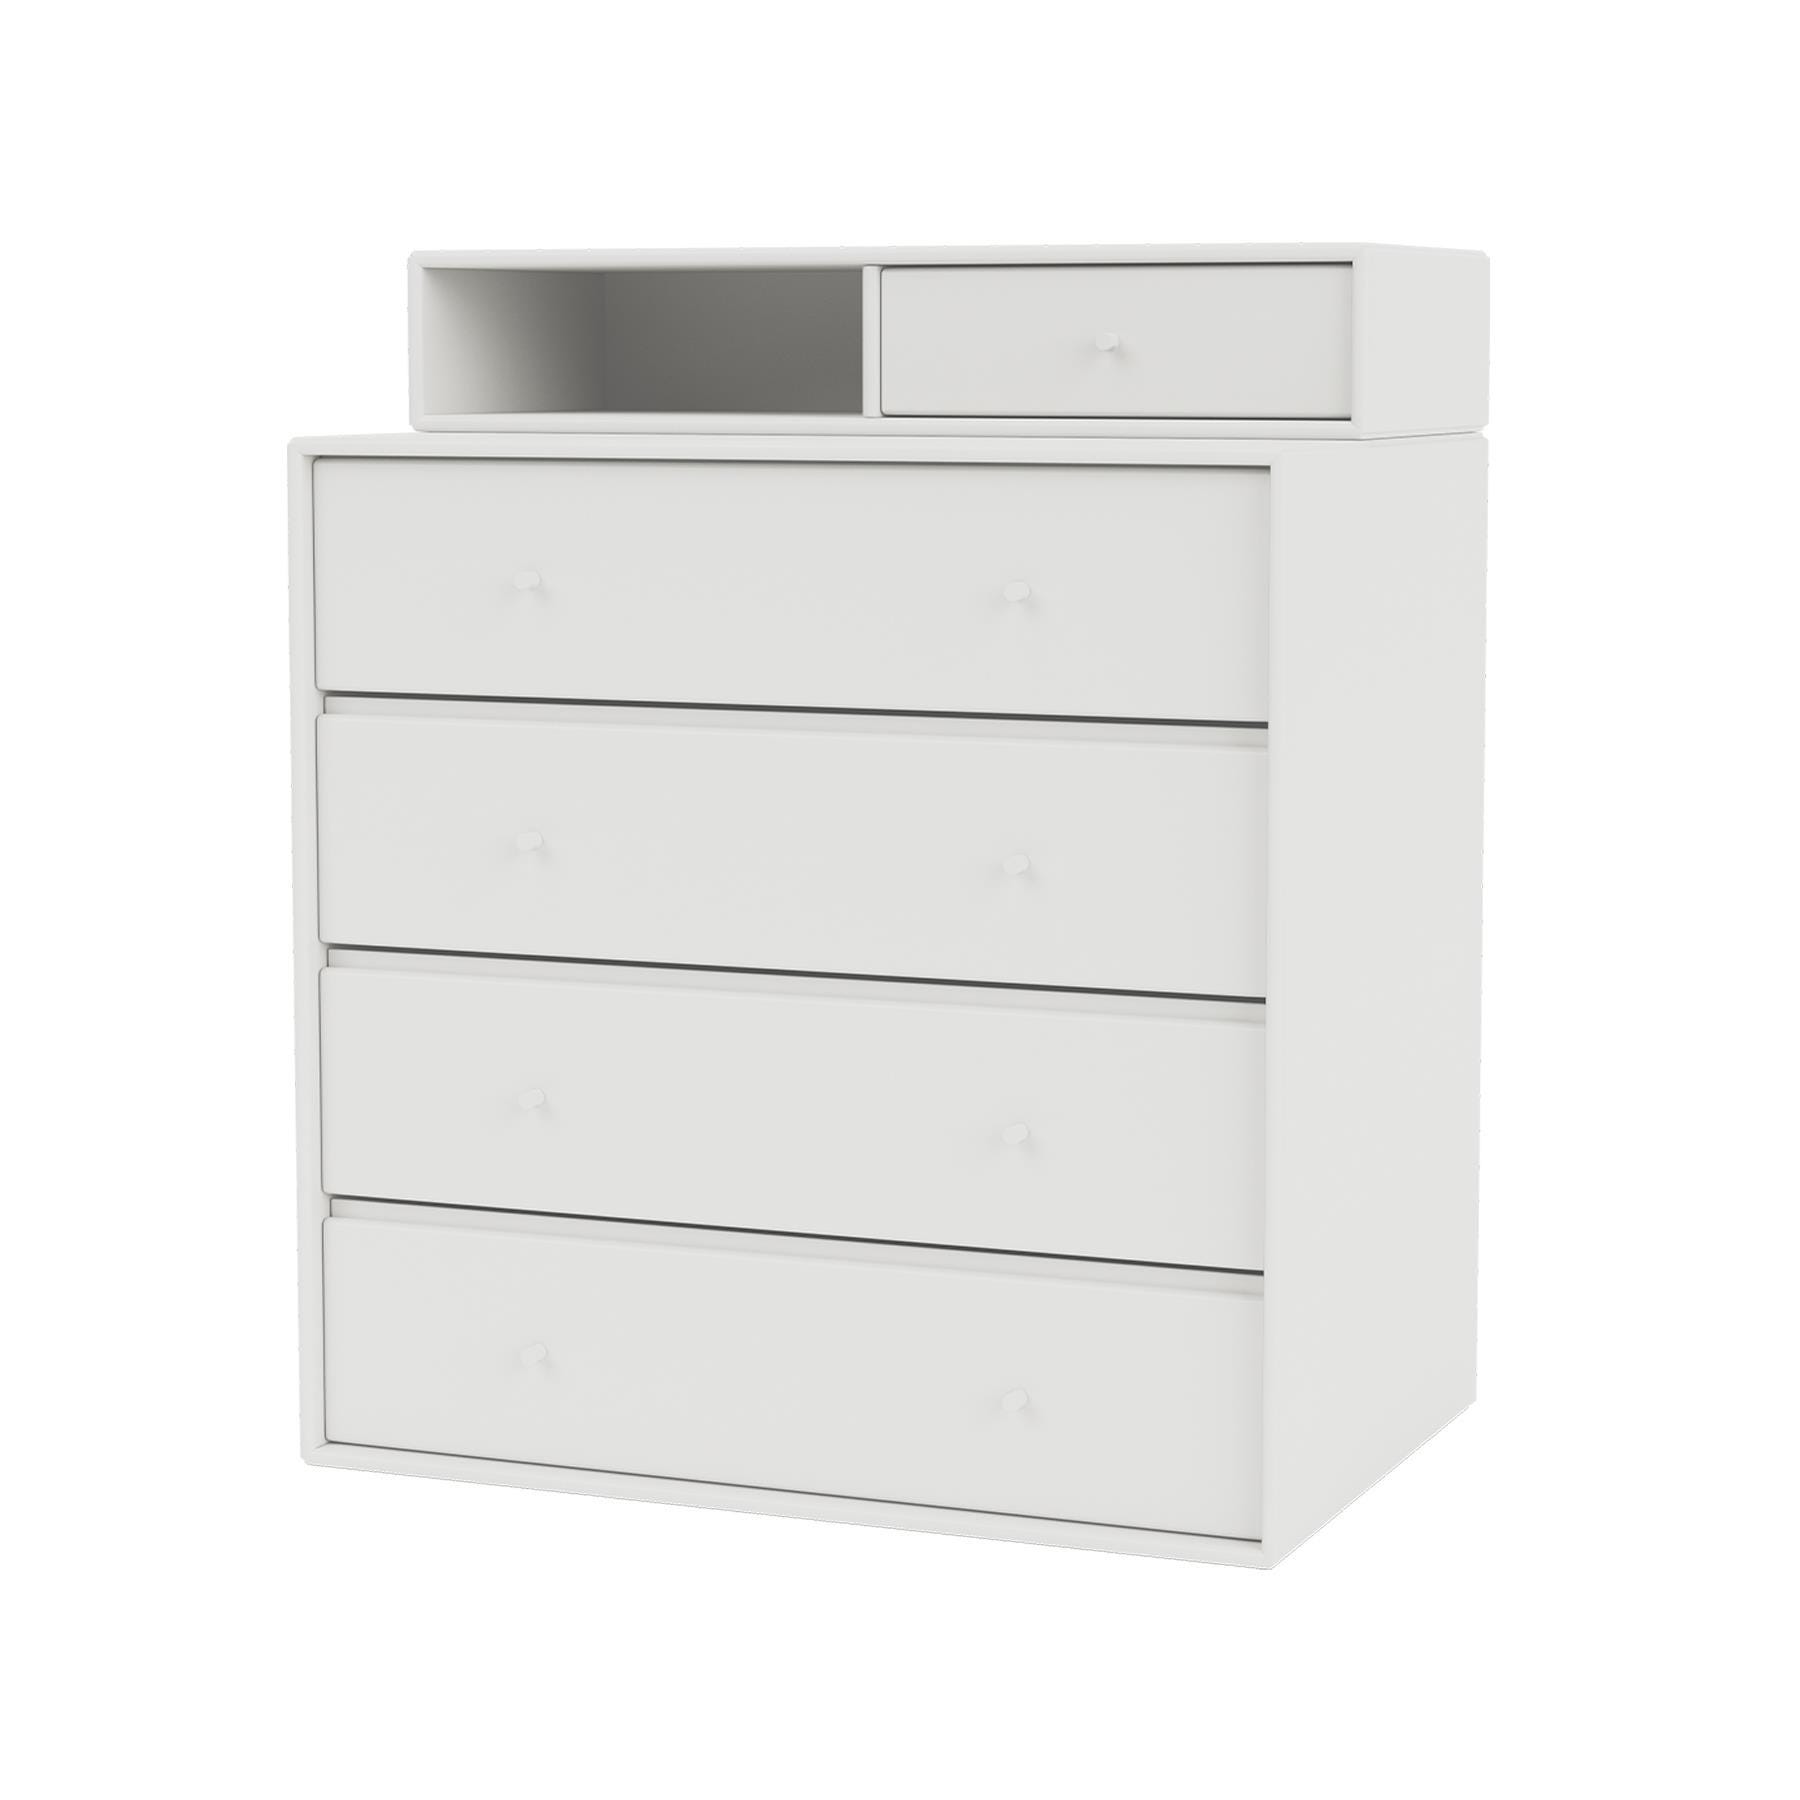 Montana Keep Chest Of Drawers White Wall Mounted White Designer Furniture From Holloways Of Ludlow